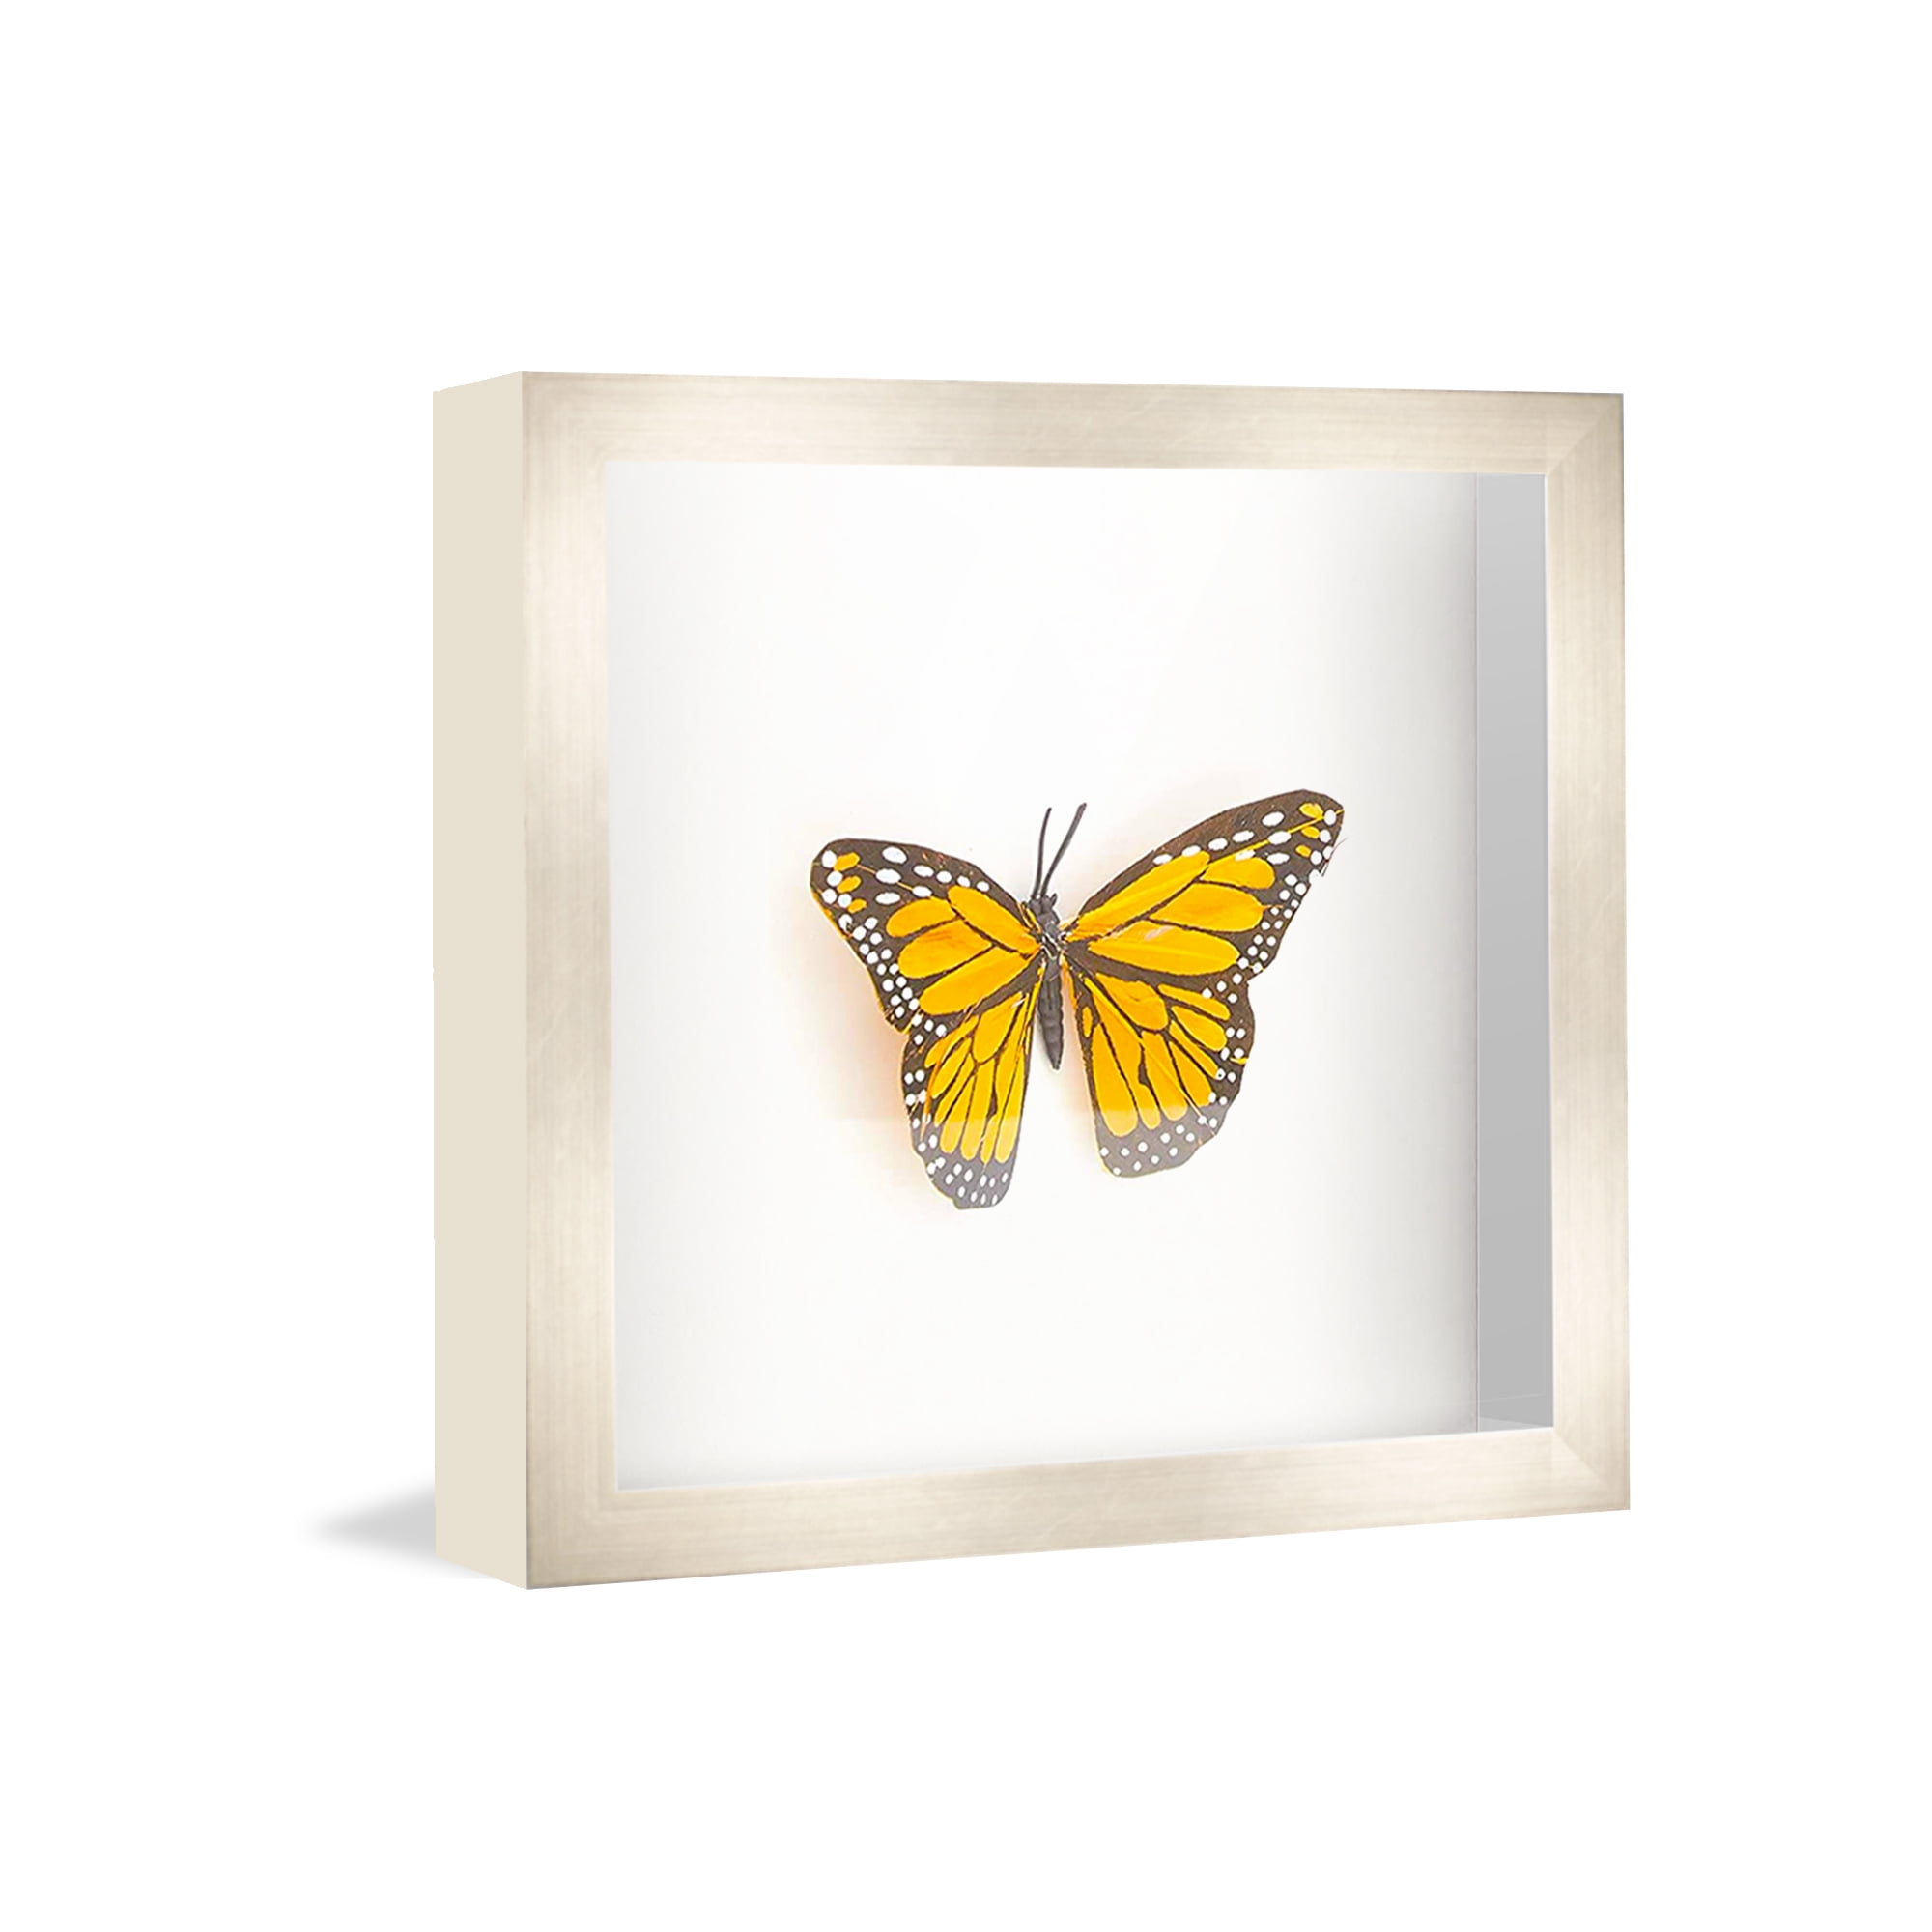 27x27 Shadow Box Frame Silver | 1.5 inches Deep Real Wood Contemporary ...